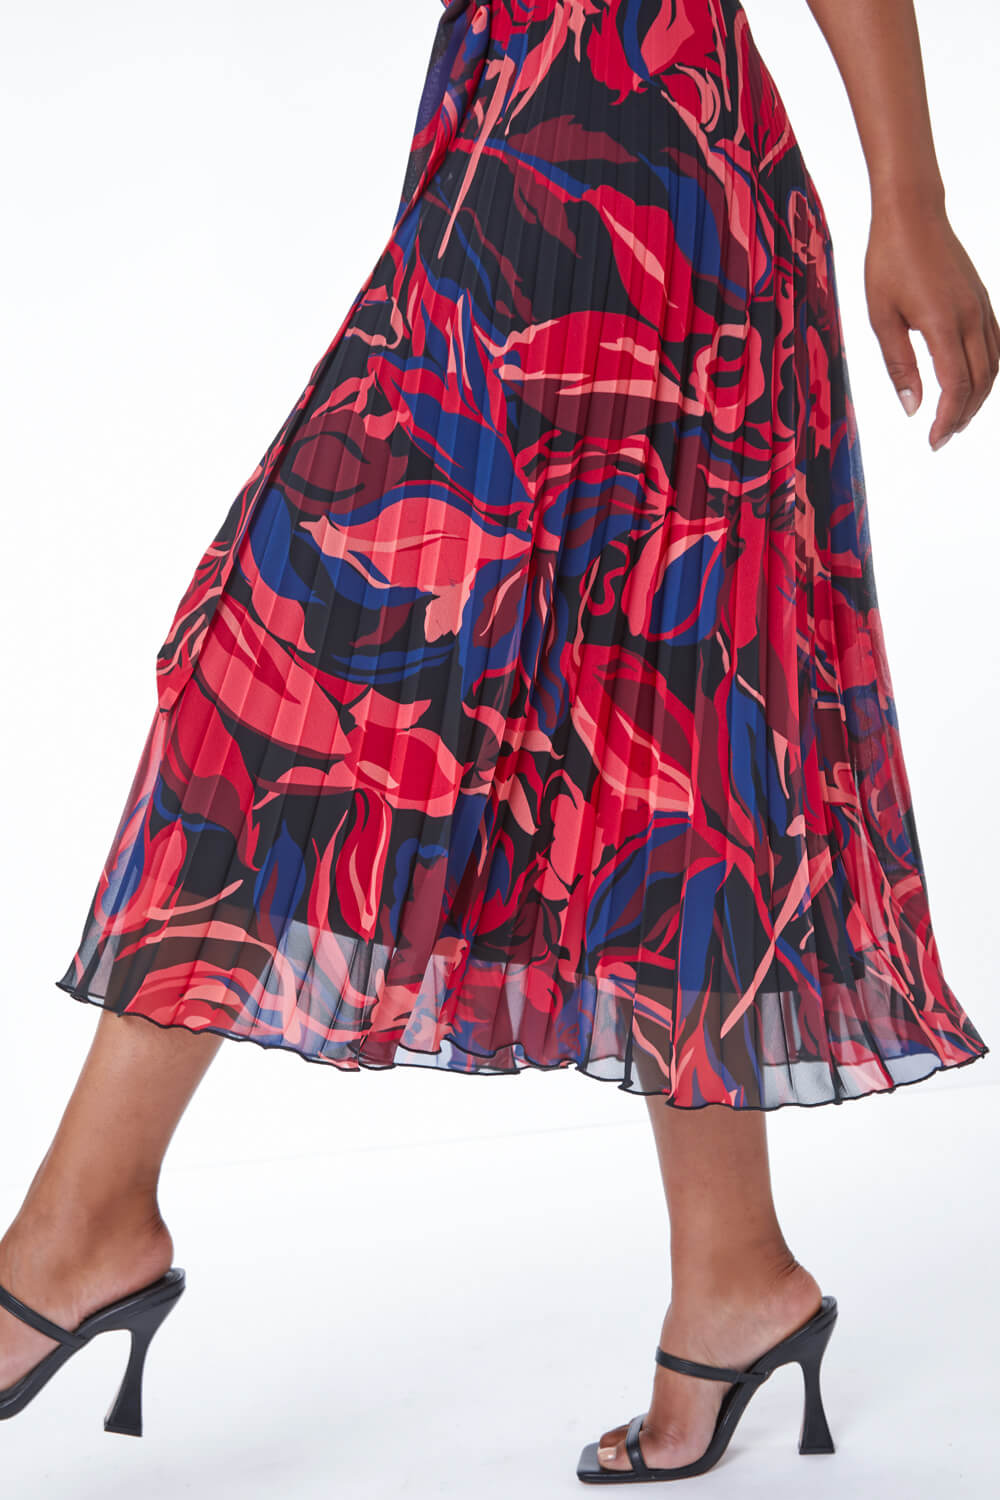 CORAL Petite Floral Pleated Midi Dress, Image 5 of 5